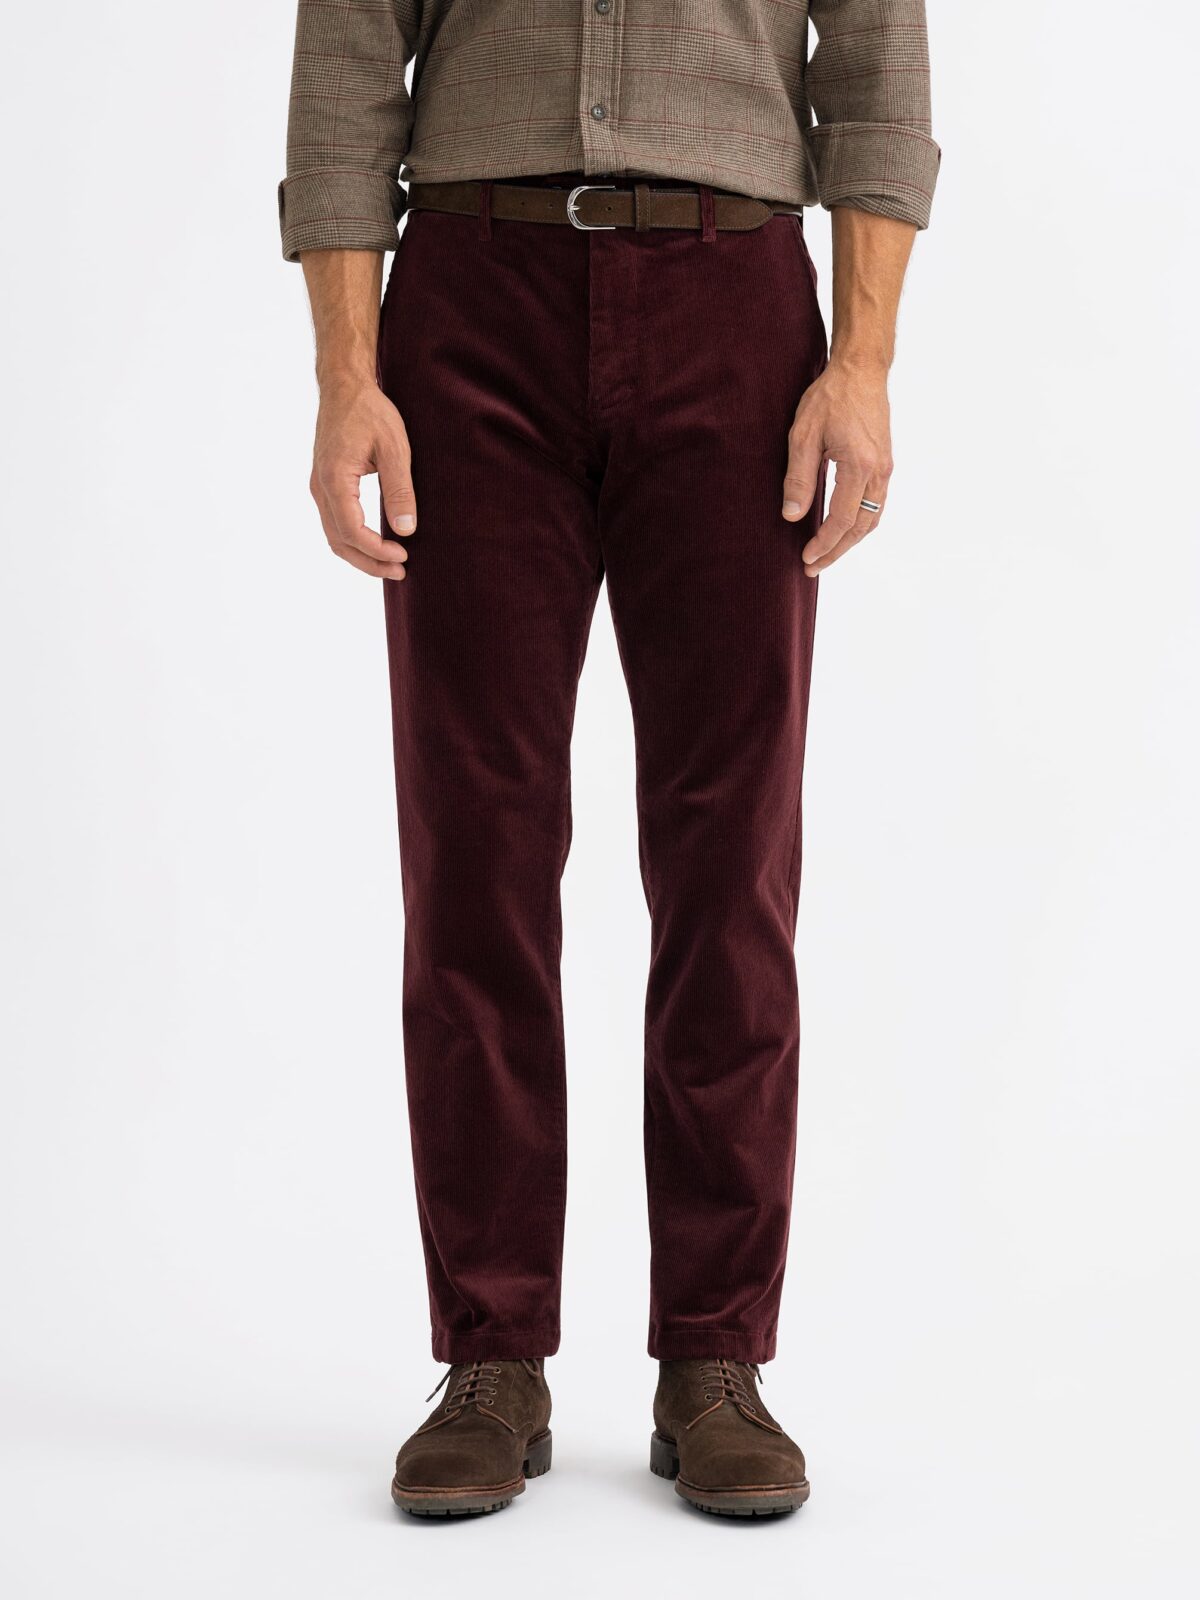 Heavyweight Corduroy Trousers - Olive | Men's Corduroy Trousers | Oliver  Brown, London